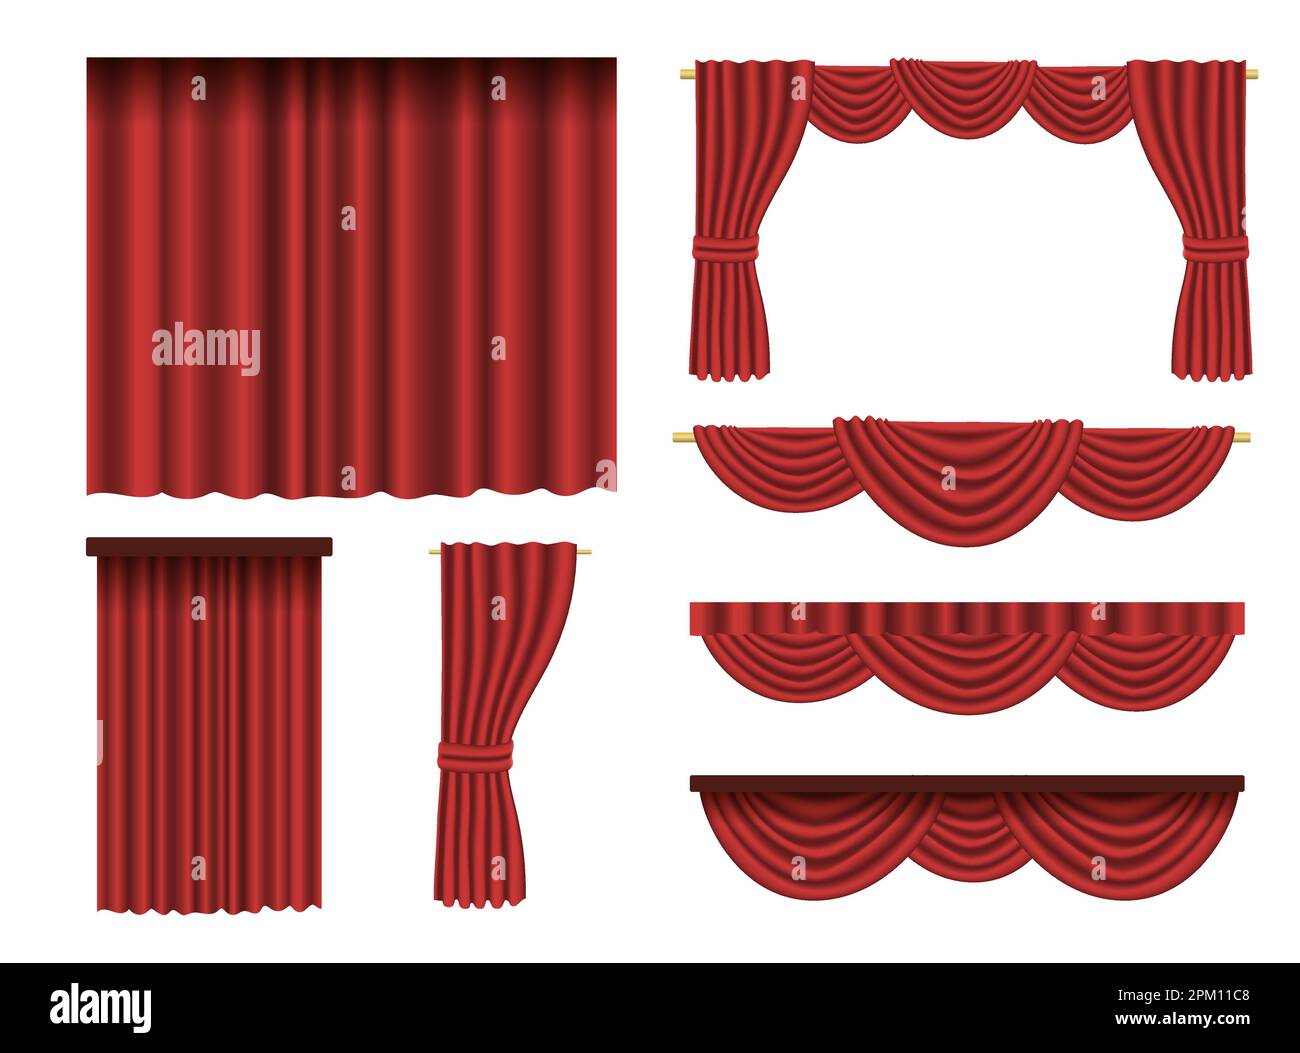 Curtains made of red fabric cartoon vector illustration set Stock Vector